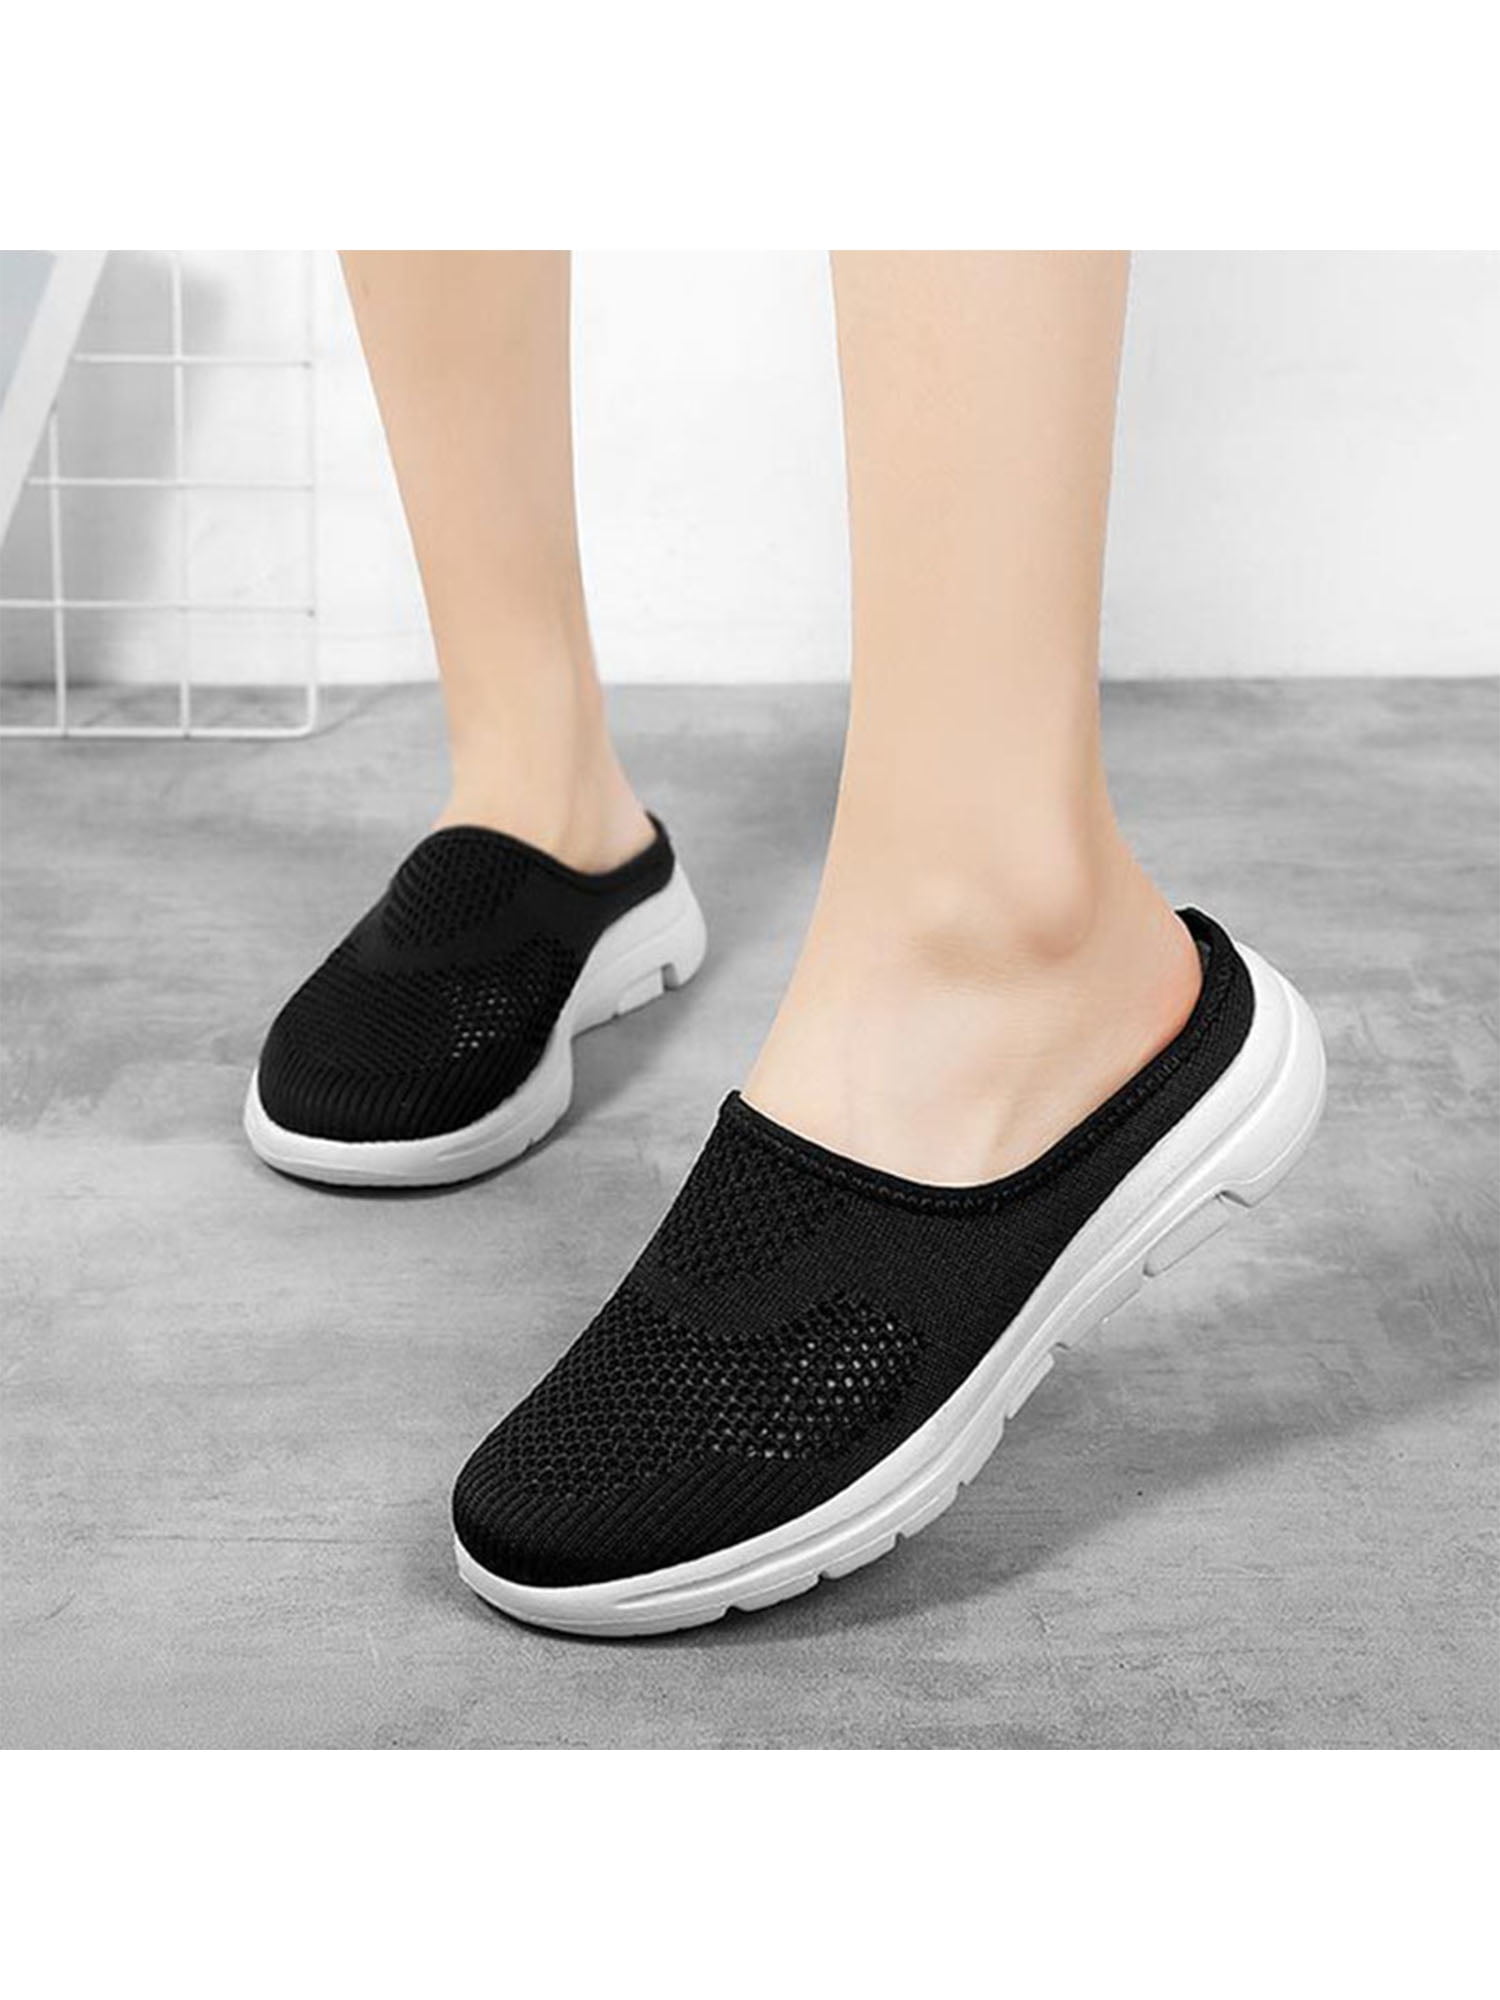 Daeful Women Mules Shoes Fashion Sneakers Comfortable Slip-On Backless ...